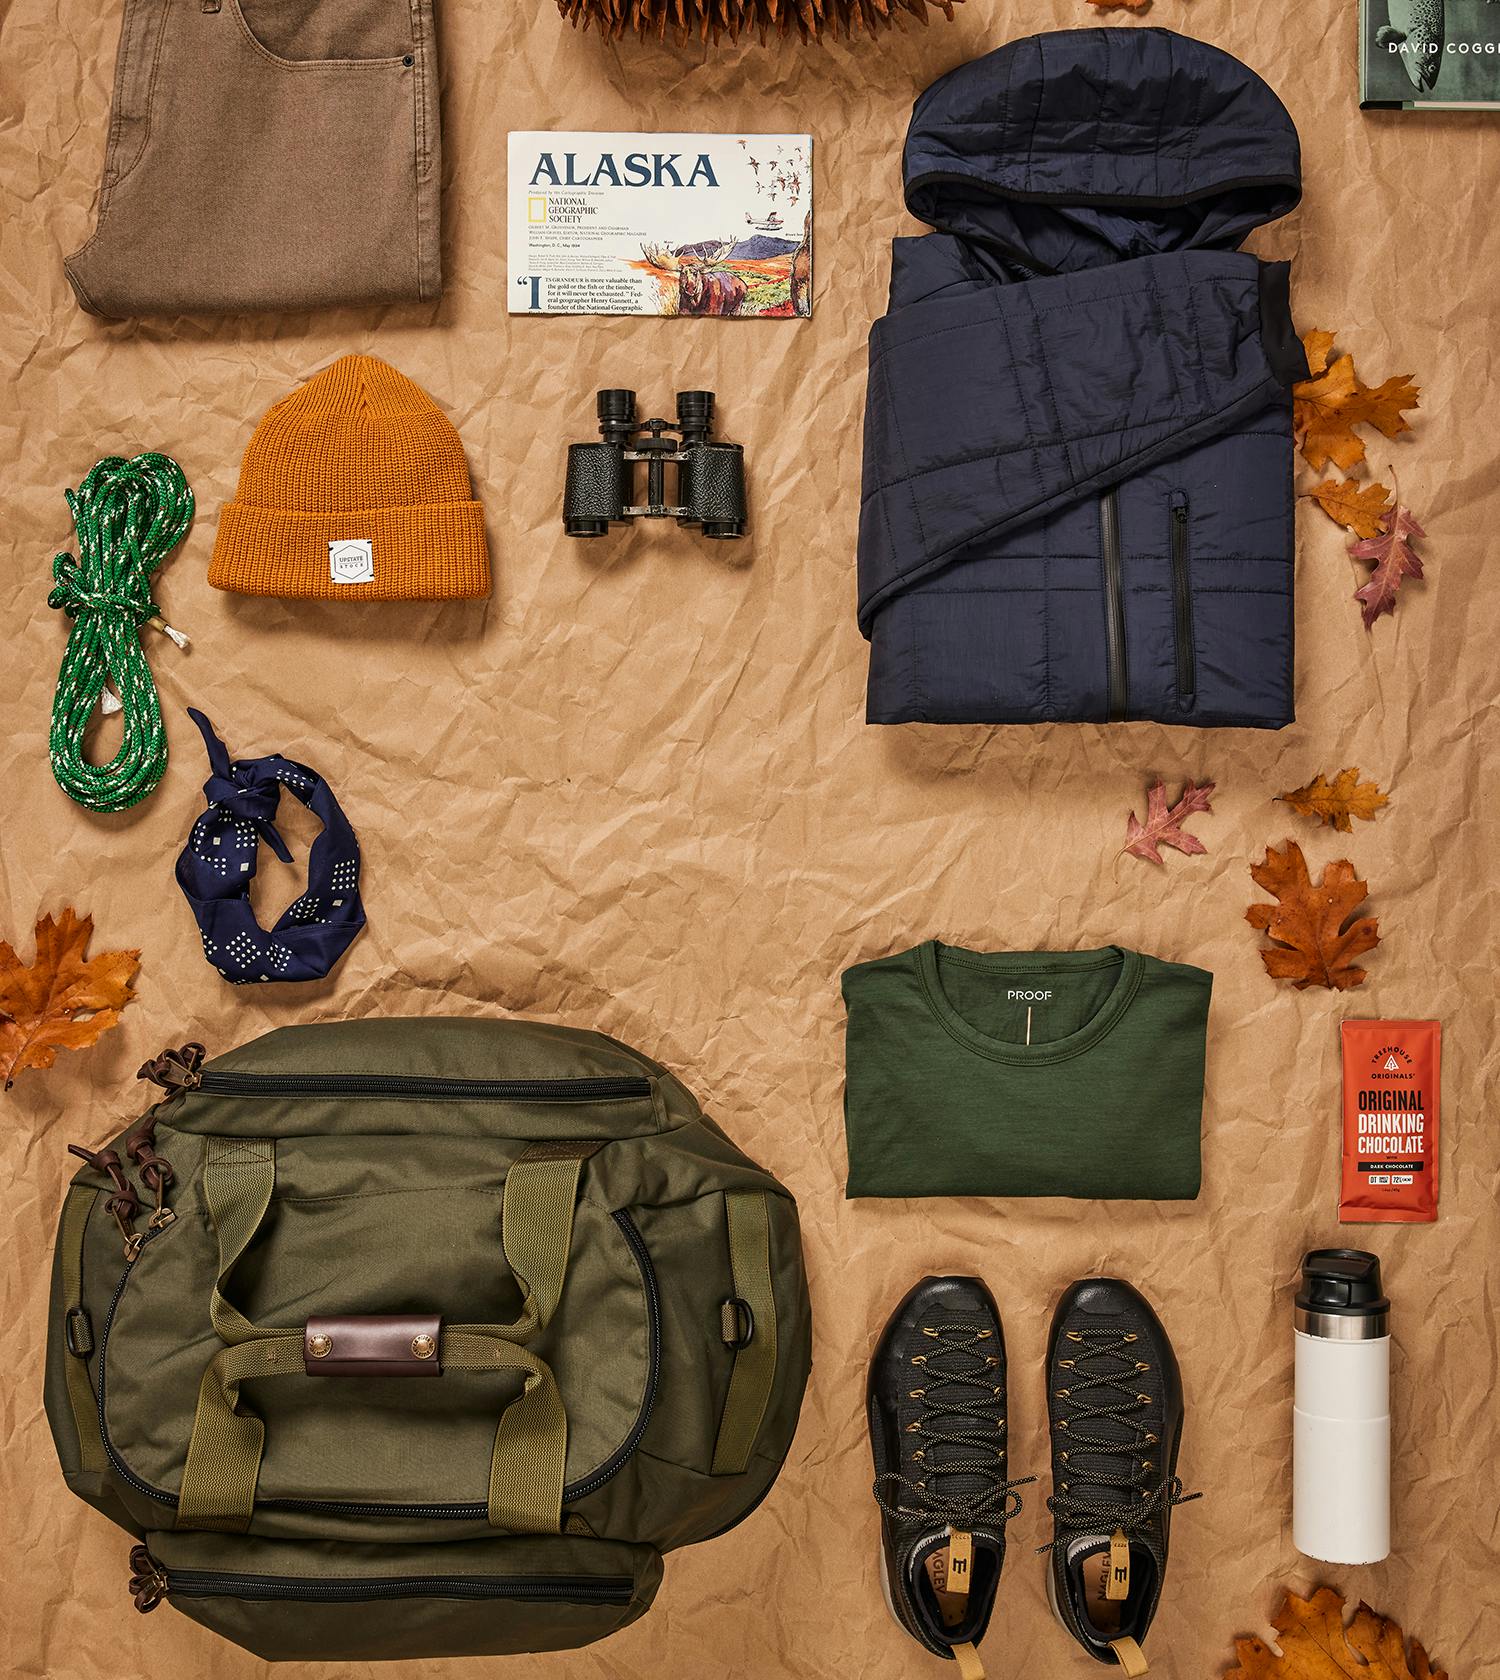 Filson's Ballistic Nylon Duffle Pack Really Is the Greatest Bag Ever Made